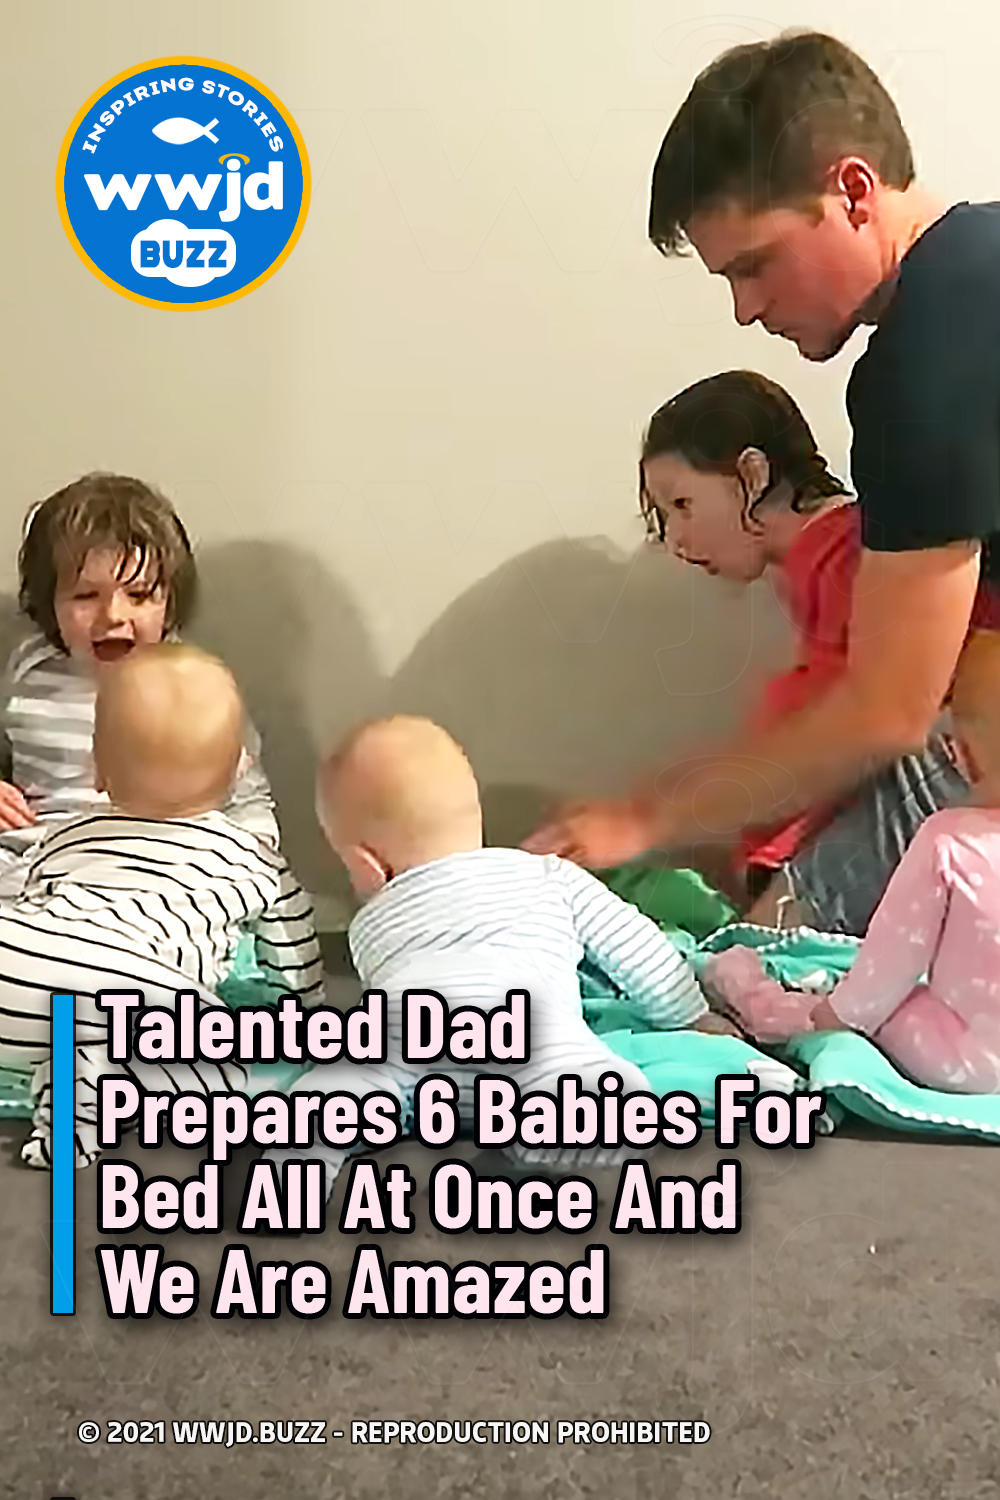 Talented Dad Prepares 6 Babies For Bed All At Once And We Are Amazed